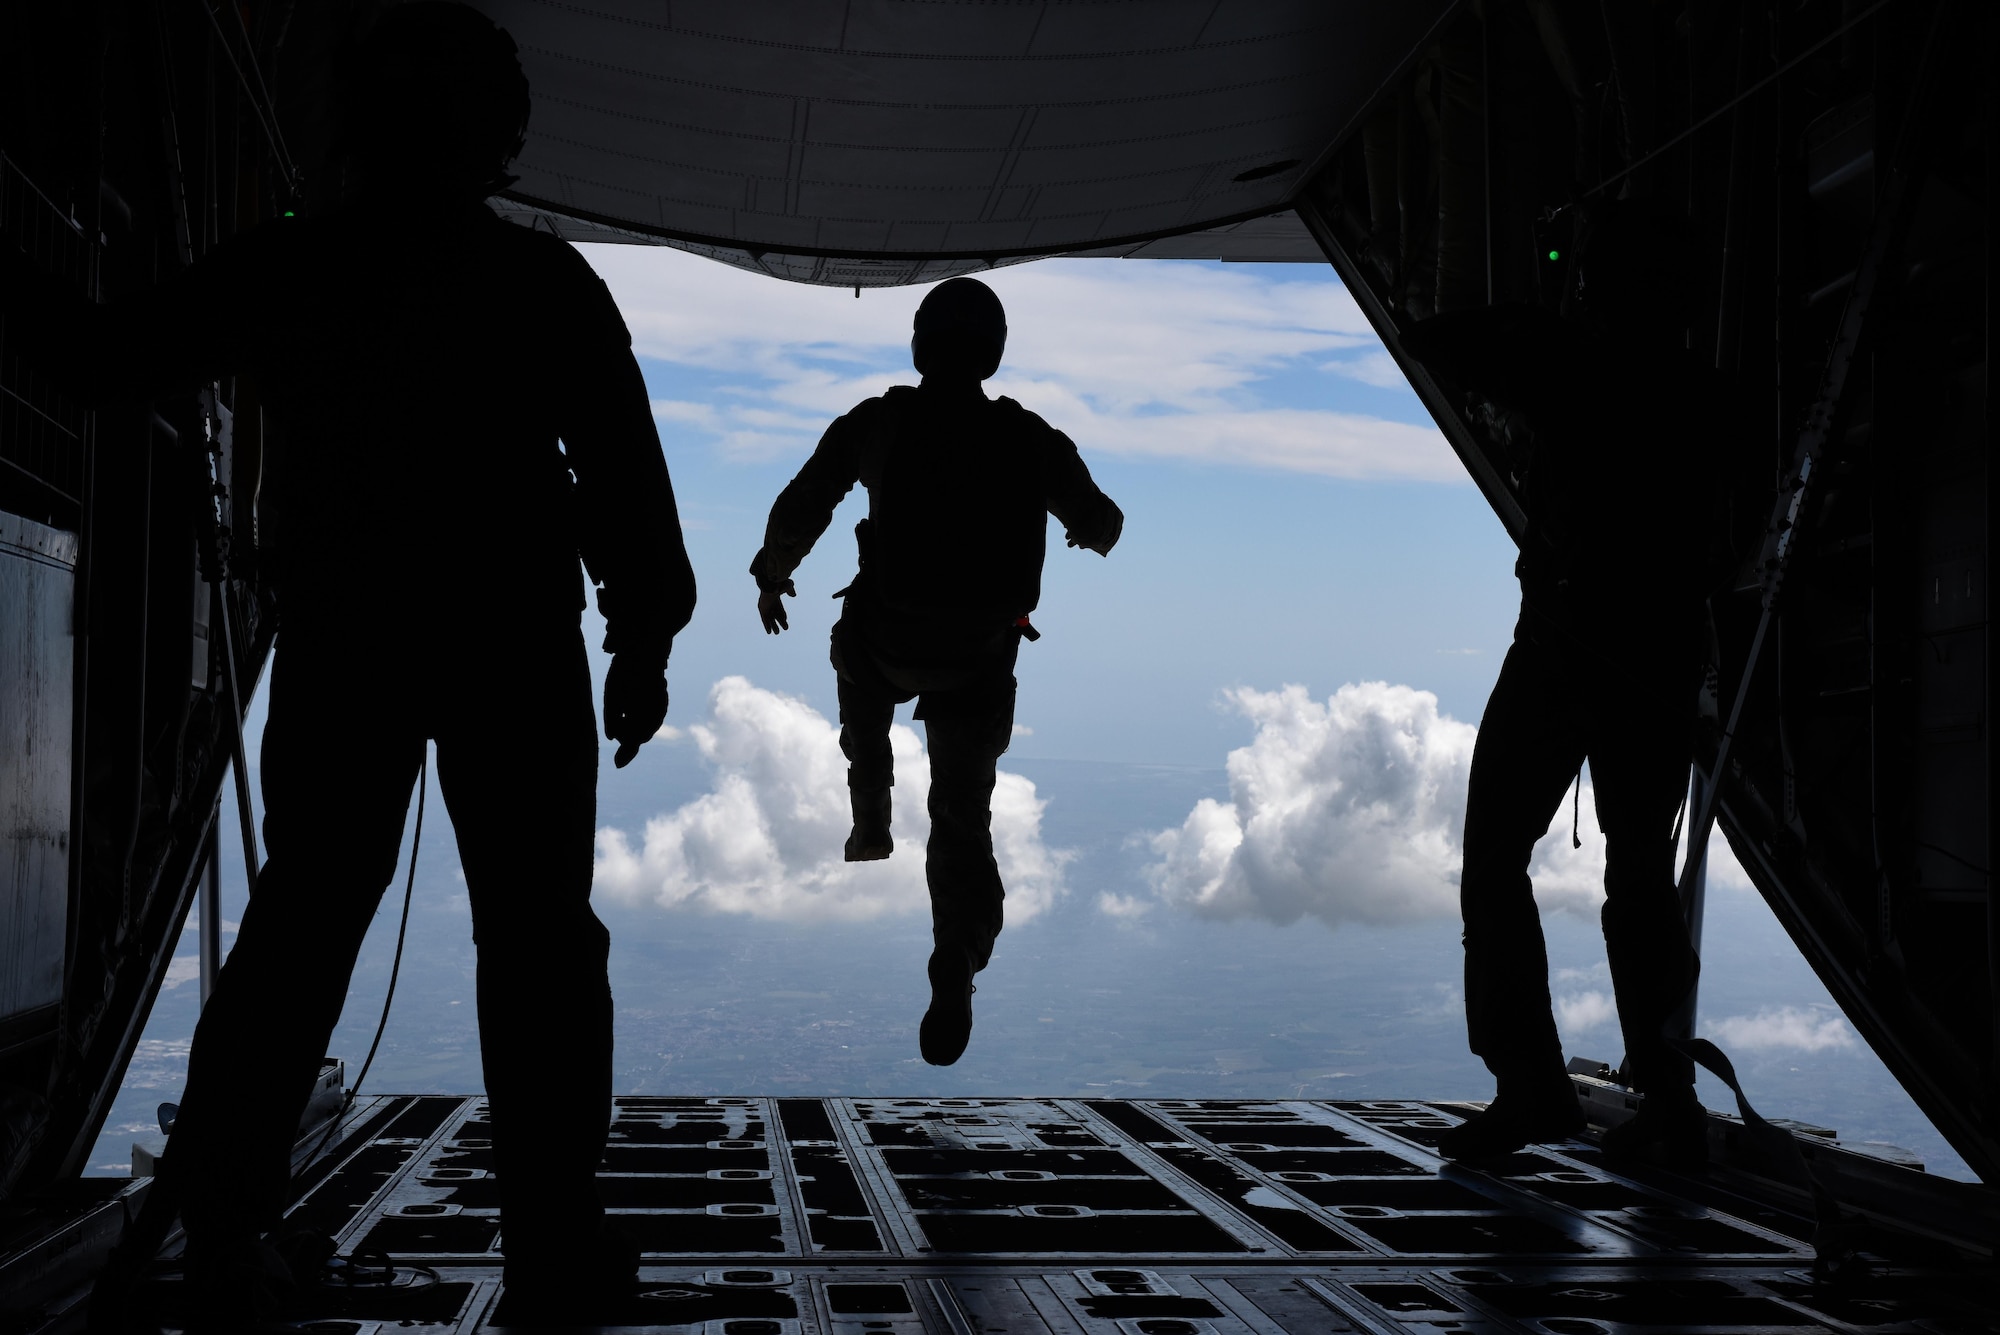 An Airman assigned to the 57th Rescue Squadron begins a freefall jump from a 37th Airlift Squadron C-130J Super Hercules during exercise Ares Shadow, Aug. 11. Ares Shadow is a 48th Fighter Wing-led personnel recovery exercise involving Airmen from across U.S. Air Forces in Europe, Air Force Special Operations Command, as well as members of the Italian armed forces. (U.S. Air Force photo/Airman 1st Class Eli Chevalier)